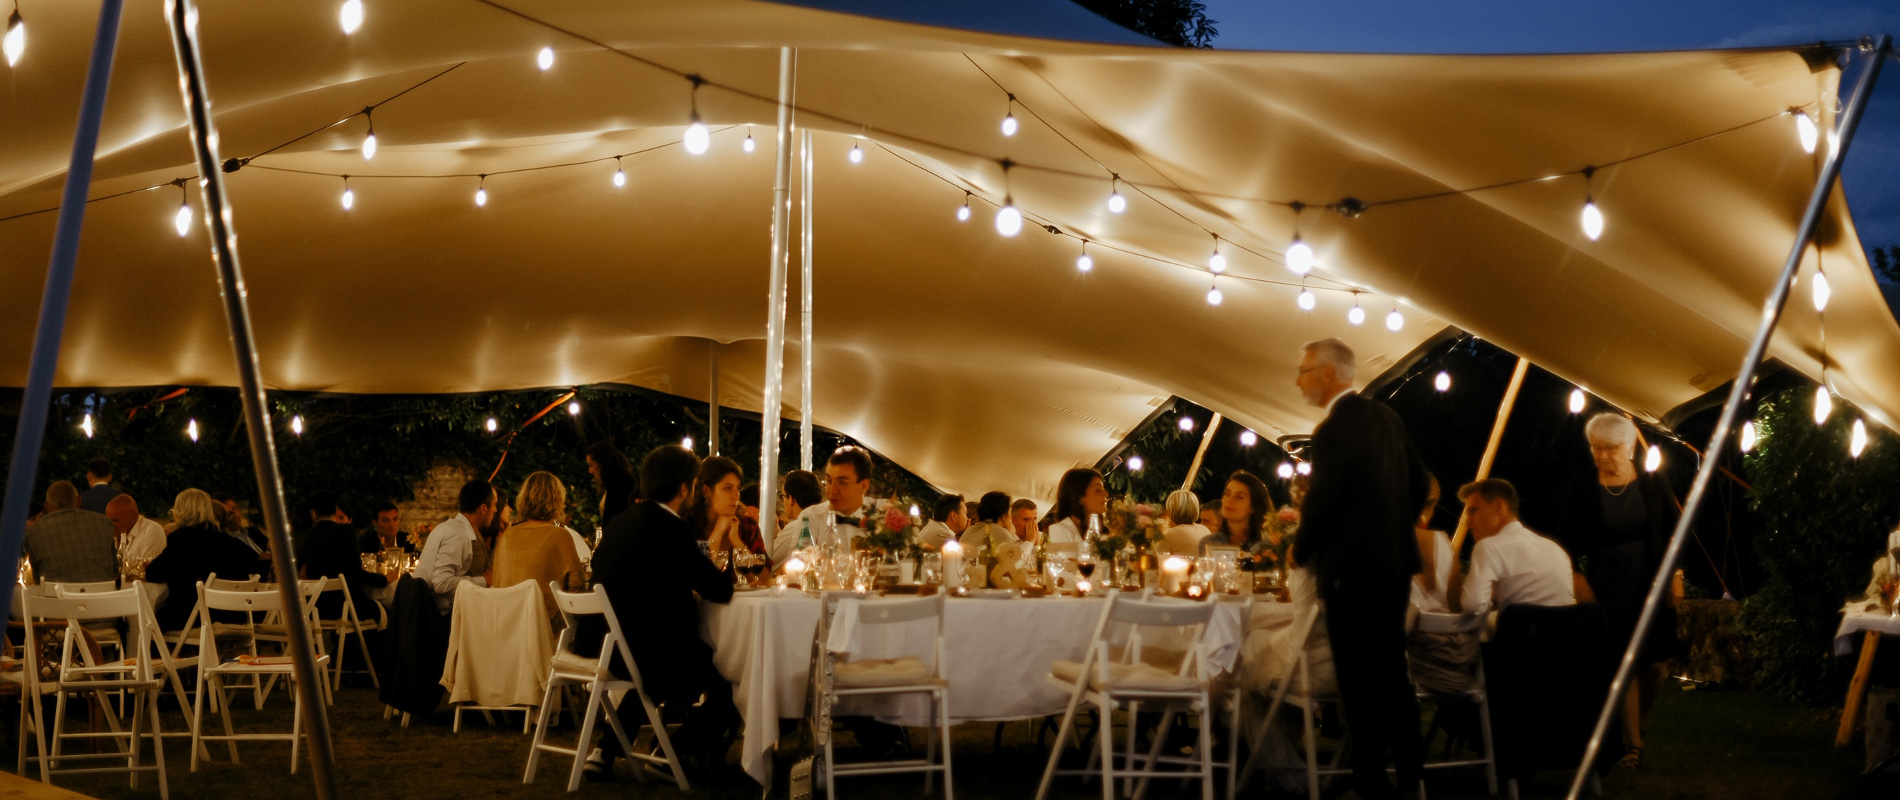 Alfresco wedding dinner under the marquee of Château de Bois Rigaud in the south of France